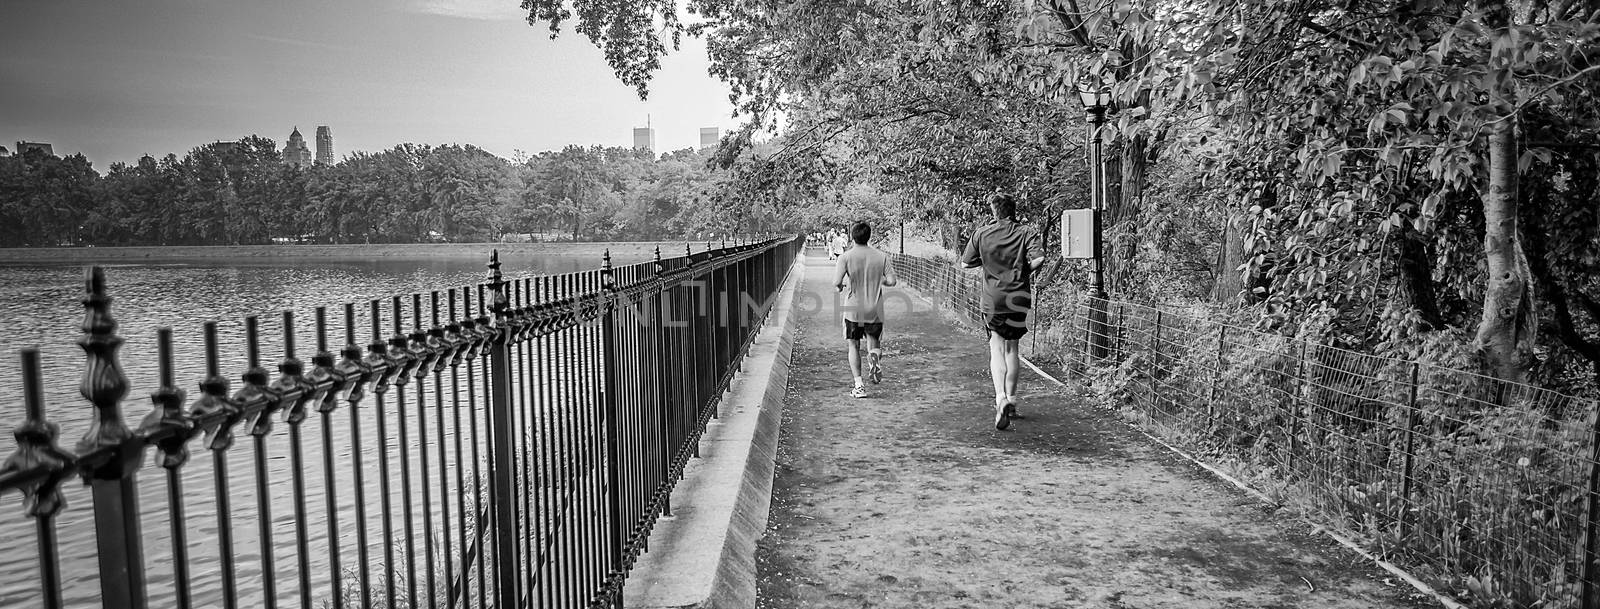 Jogging in Central Park, New York City, USA by marcorubino